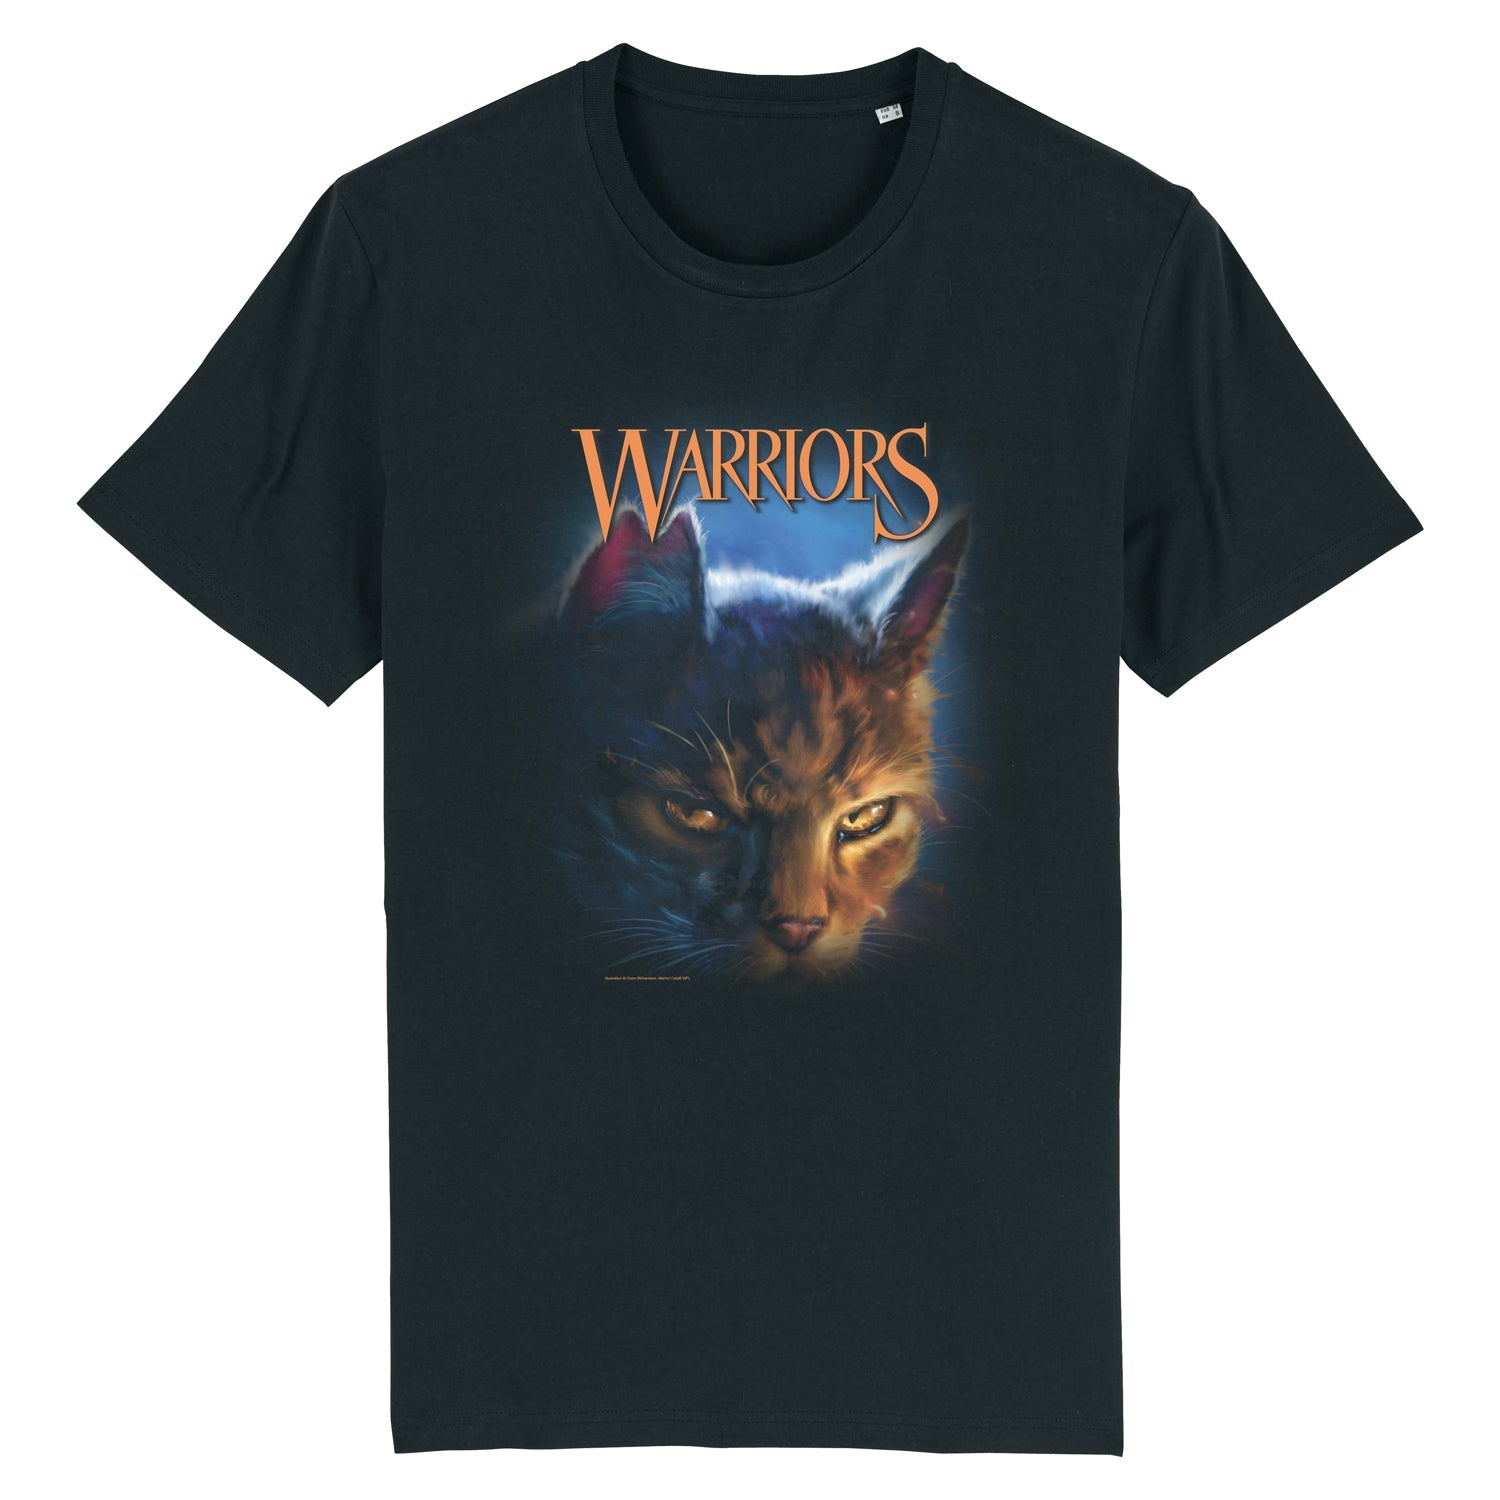 Fire And Ice - Youth Unisex T-Shirt